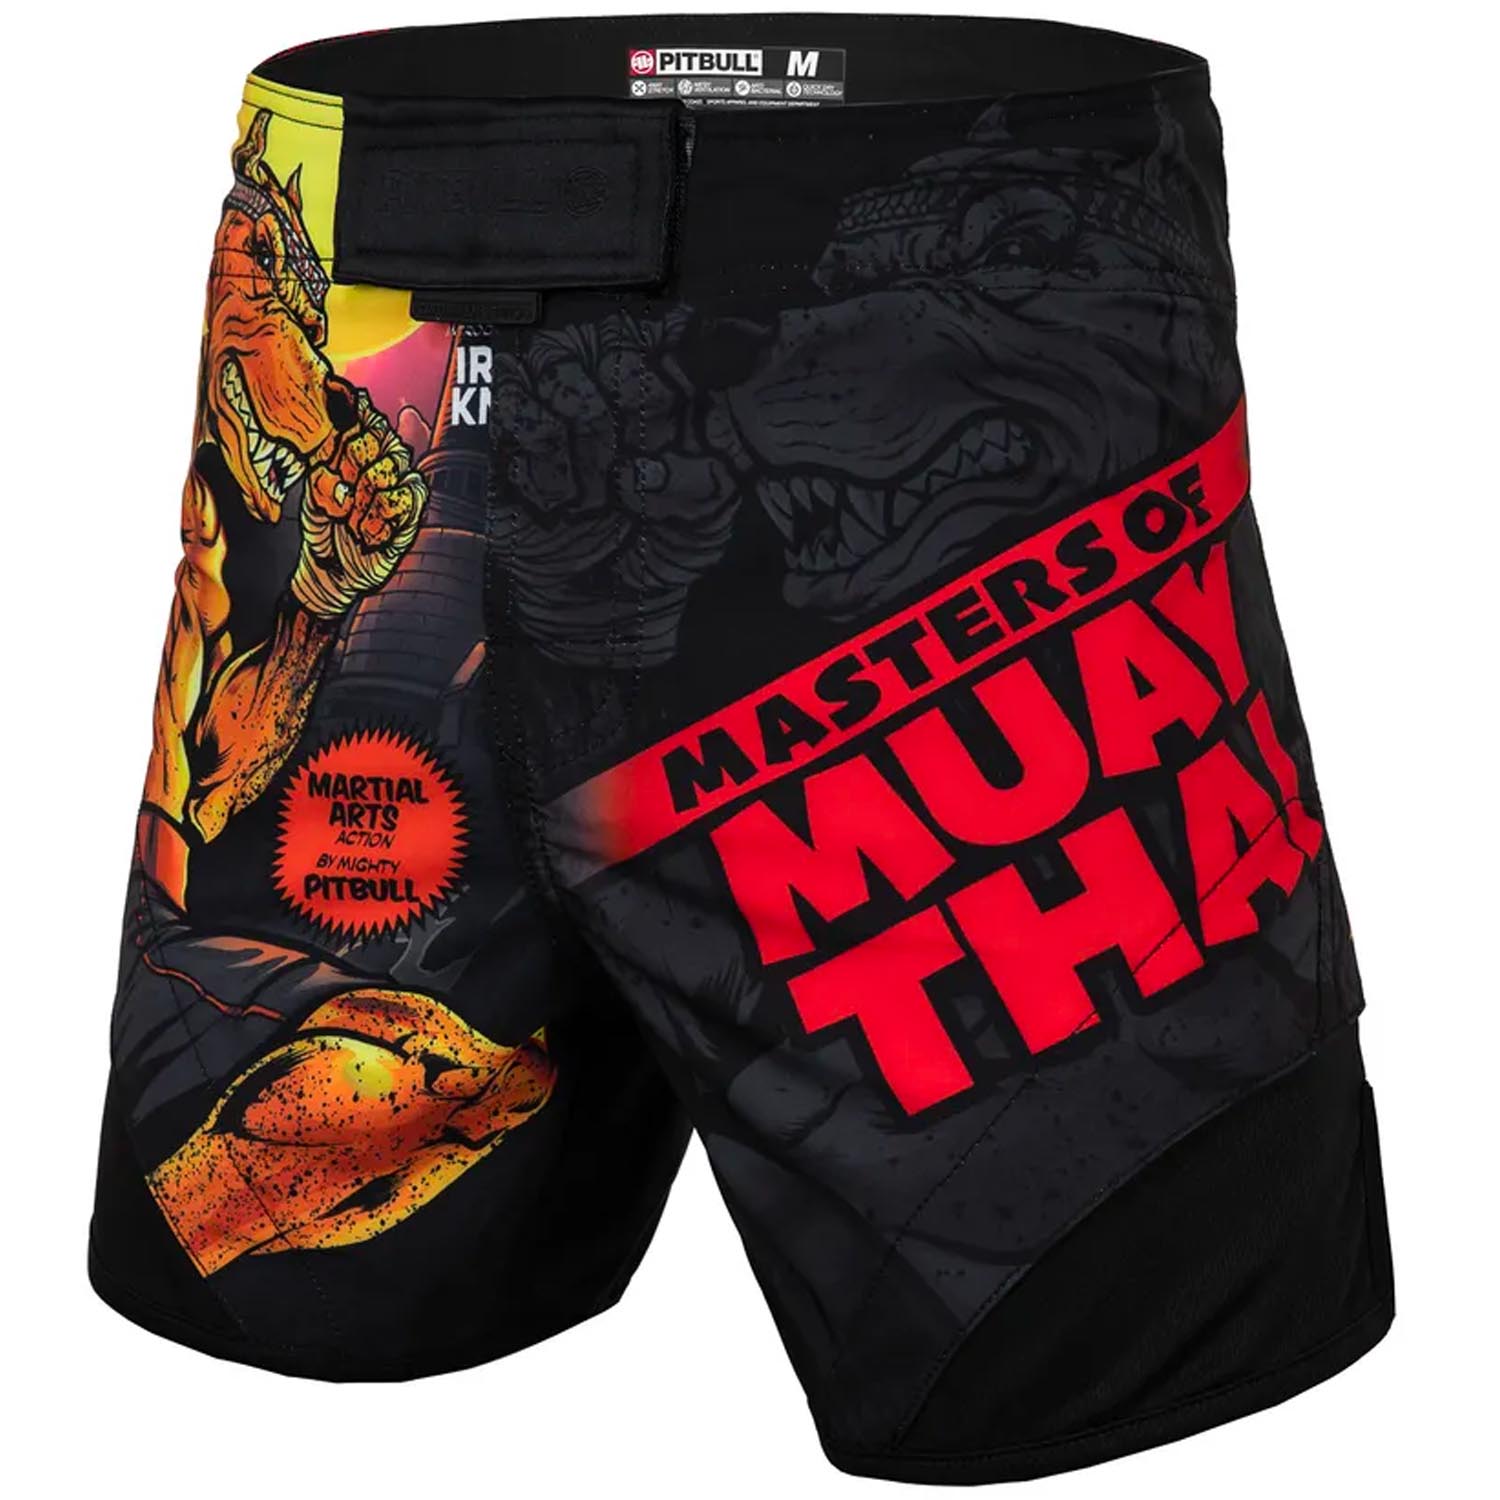 Pit Bull West Coast MMA Fight Shorts, Master of Muay Thai Hilltop, black-red